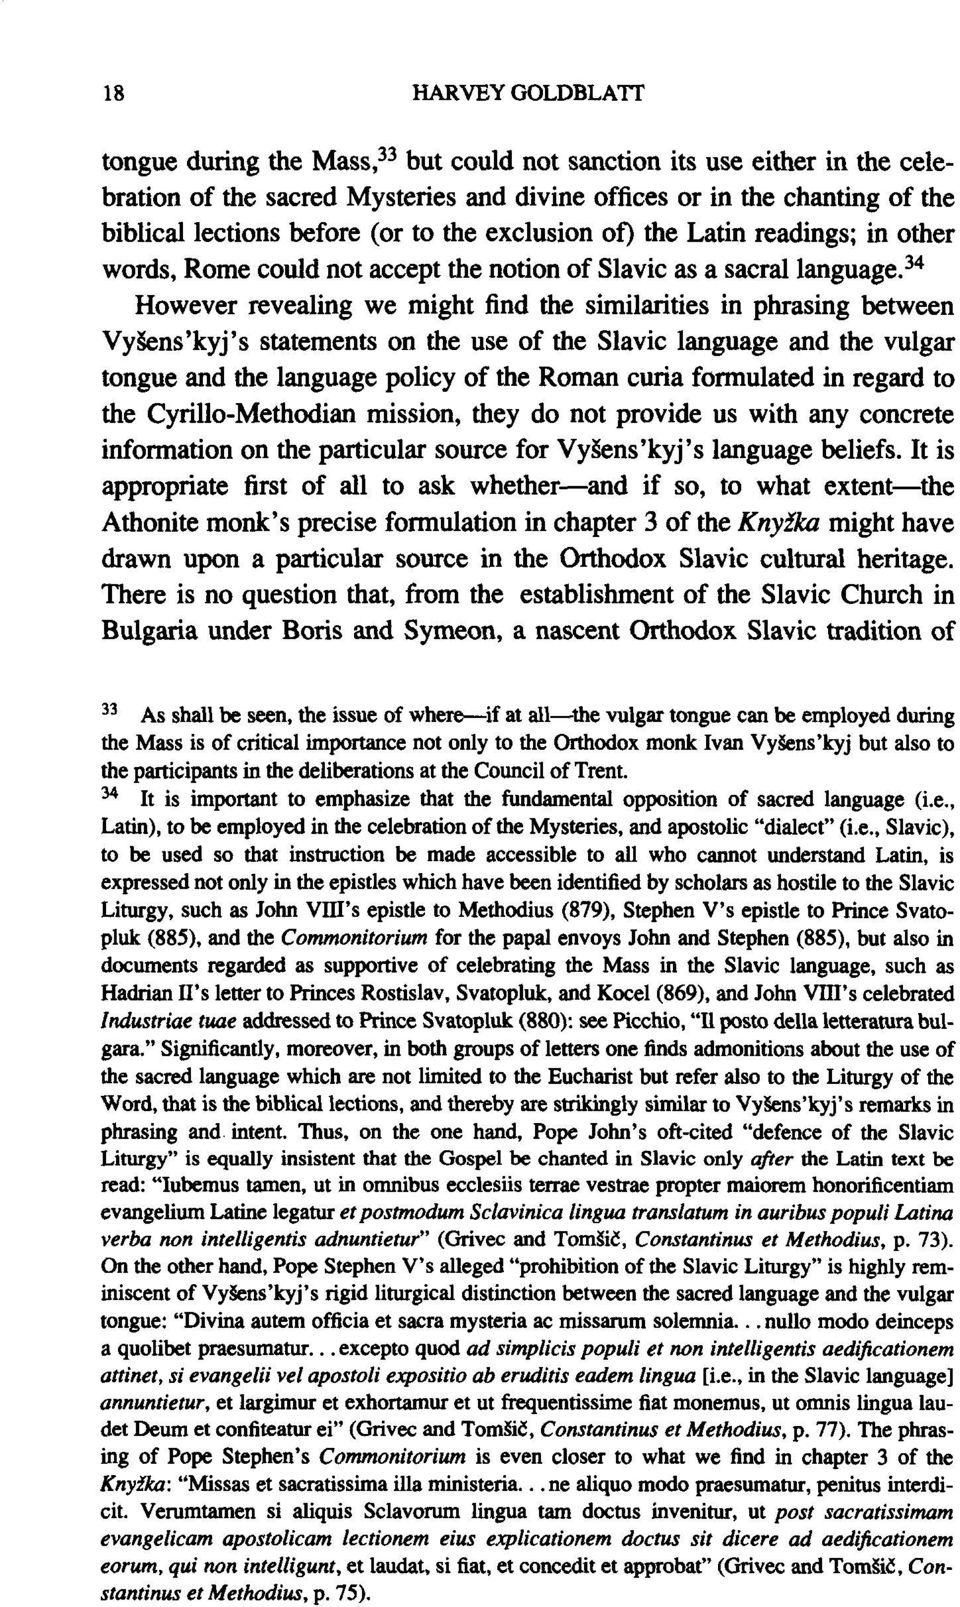 34 However revealing we might find the similarities in phrasing between Vysens'kyj's statements on the use of the Slavic language and the vulgar tongue and the language policy of the Roman curia